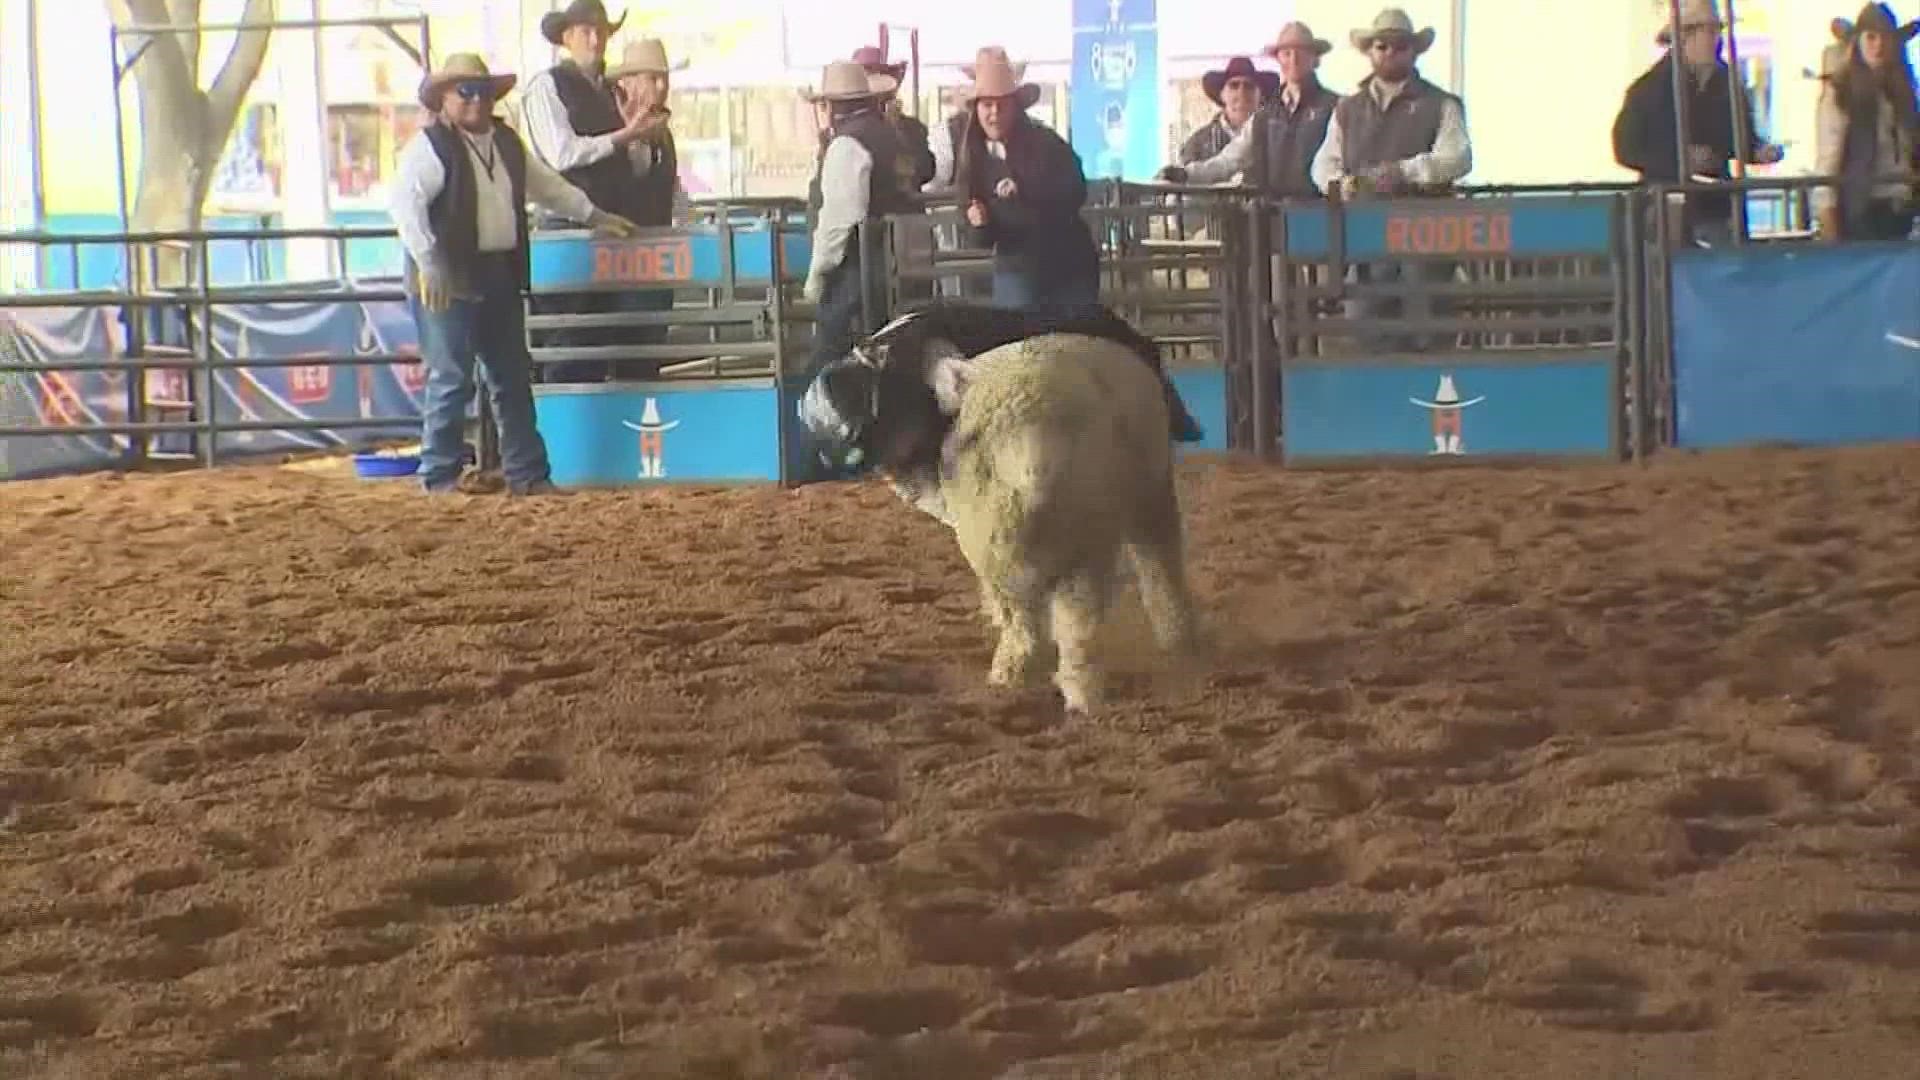 In many parts of the country, people have never heard of such an event, but in Texas at RodeoHouston, mutton bustin’ is a pint-sized tradition!